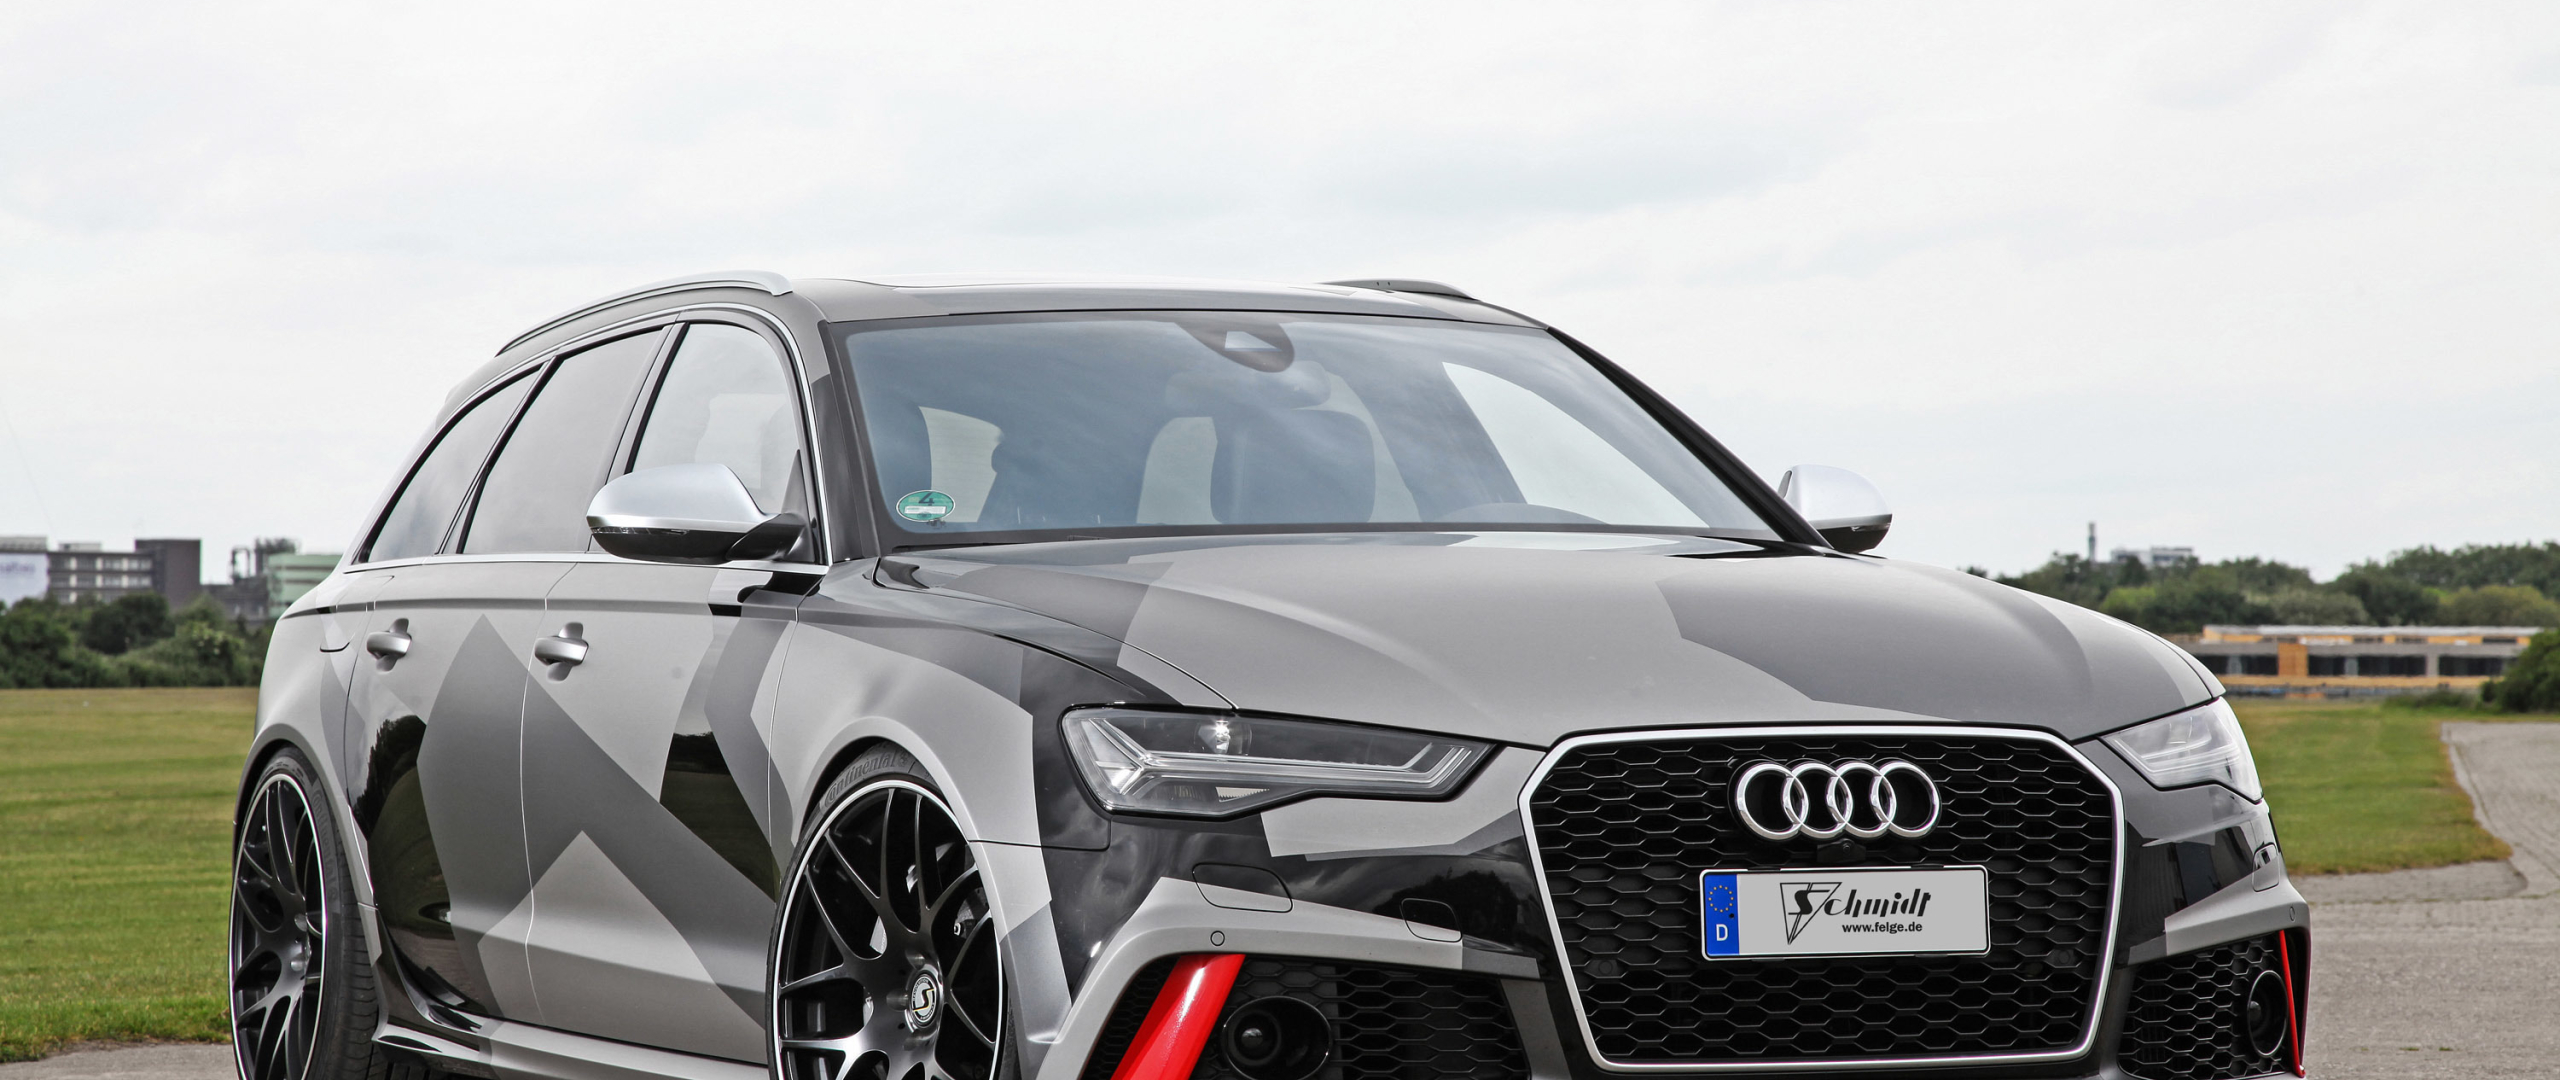 2560x1080 Audi Rs6 Avant 2560x1080 Resolution Wallpaper Hd Cars 4k Wallpapers Images Photos And Background Wallpapers Den